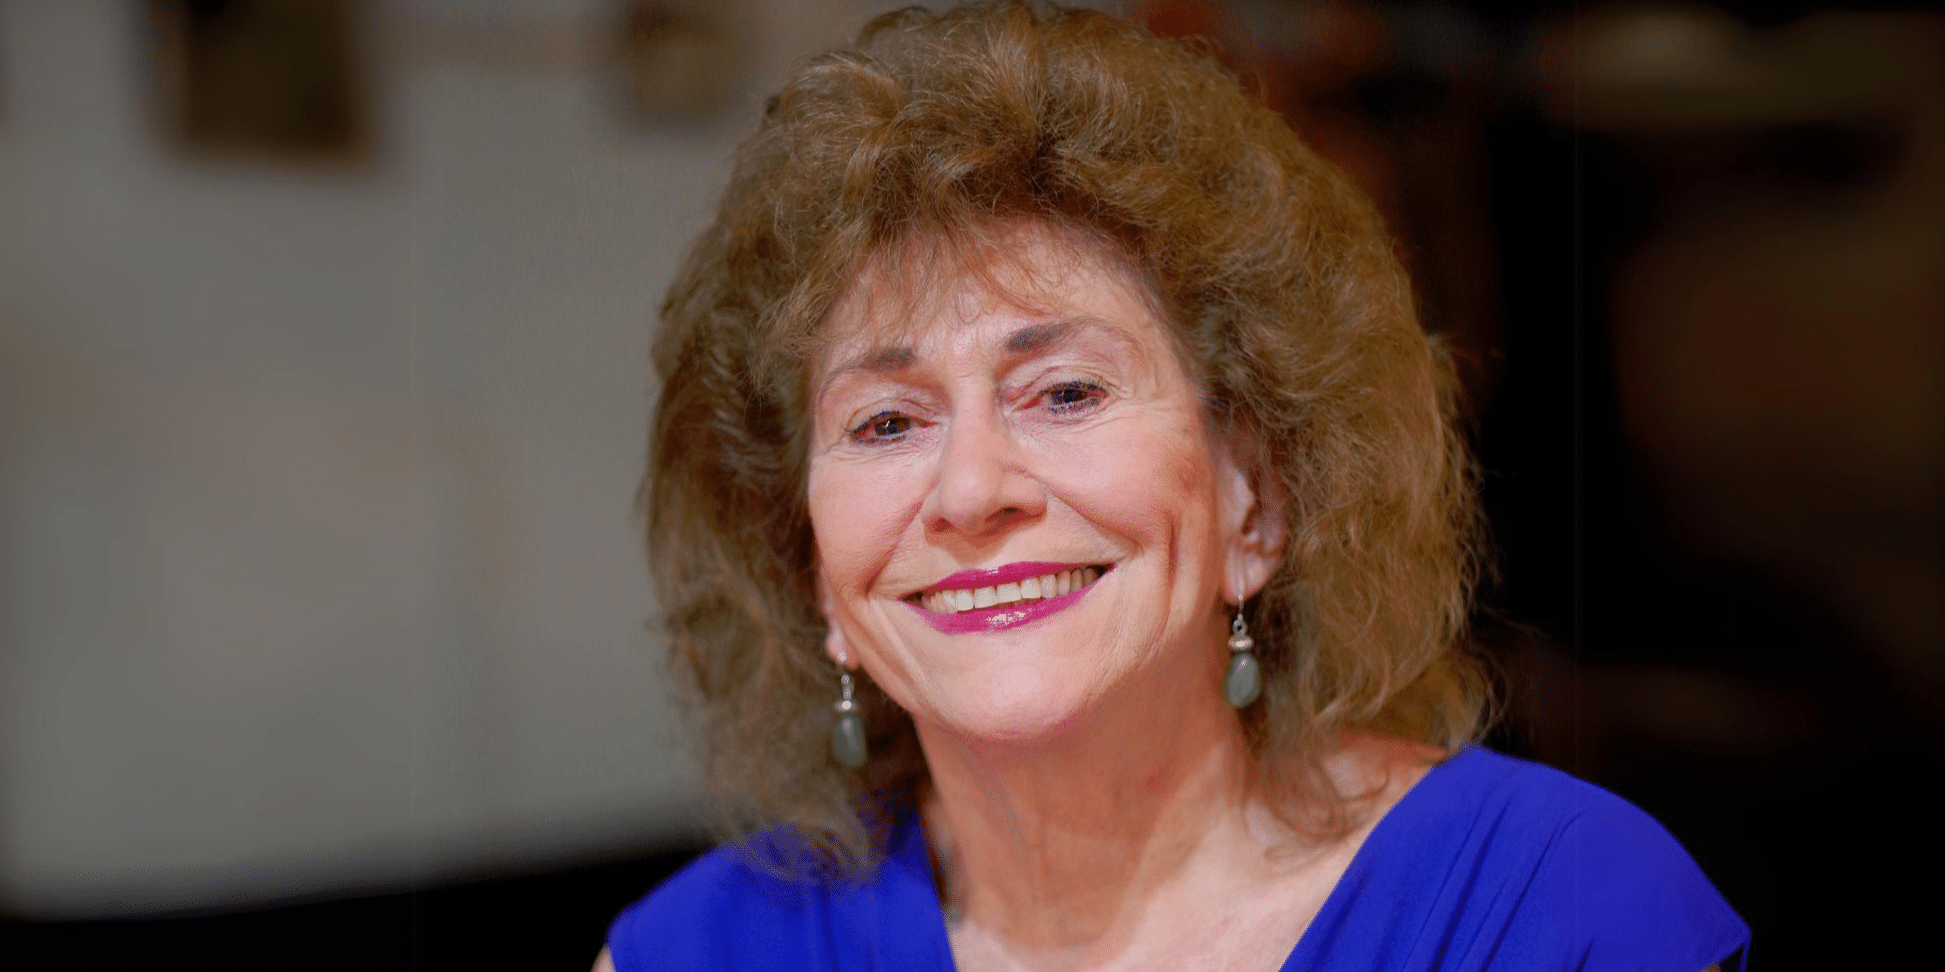 Candid Conversations: Bestselling Author Frances Metzman Sheds Light on Her Latest Thriller, 'The Cha Cha Babes Dance with the Devil'